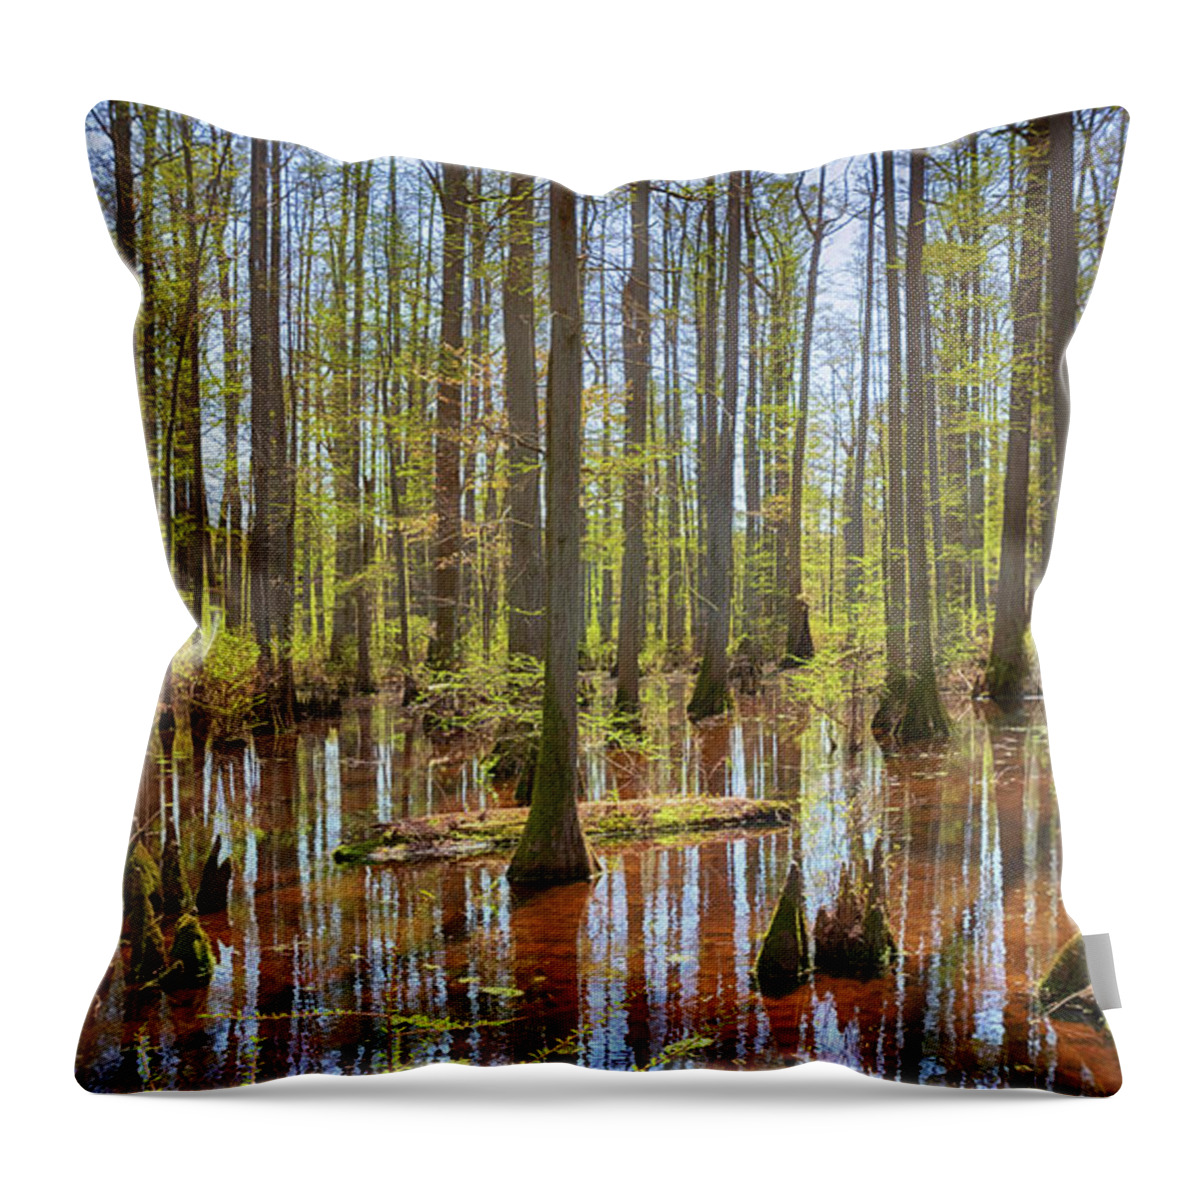 Heron Pond Throw Pillow featuring the photograph Heron Pond by Susan Rissi Tregoning